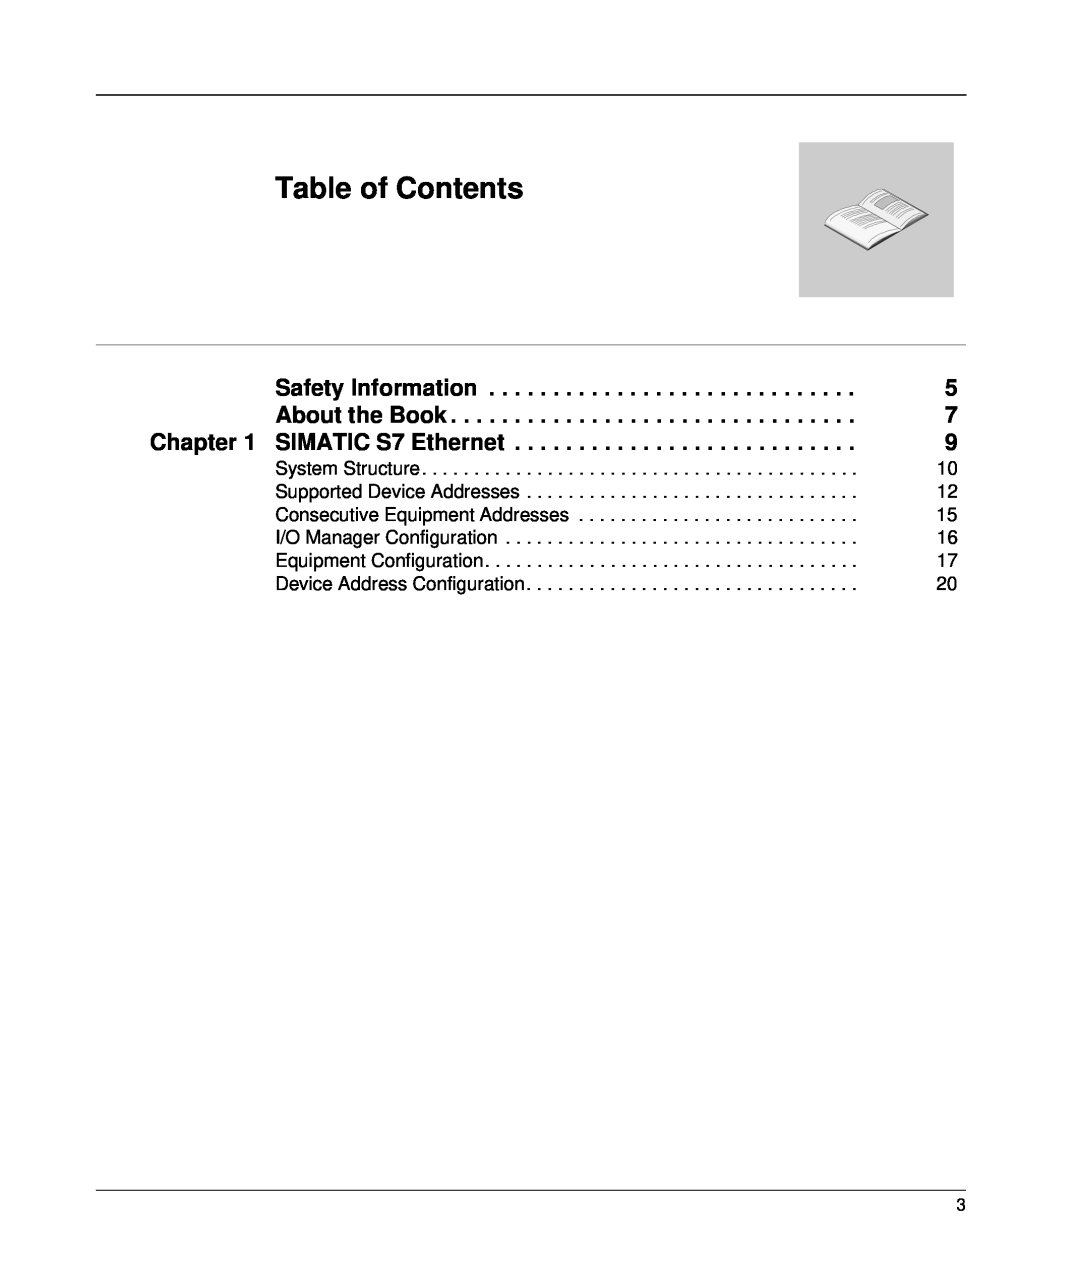 Schneider Electric manual Table of Contents, Safety Information, About the Book, SIMATIC S7 Ethernet 